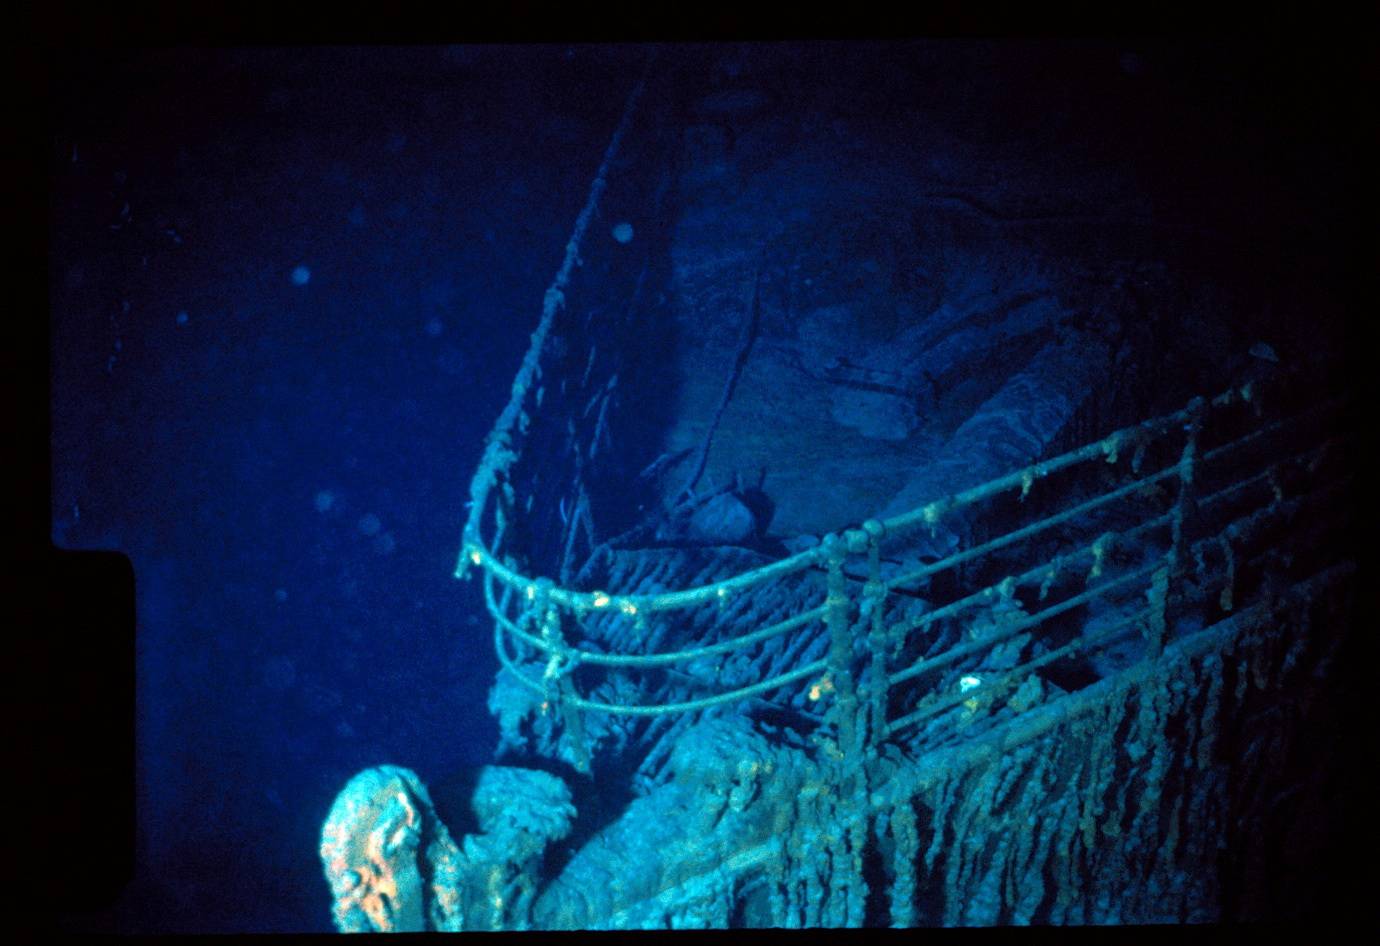 A handout image from a rare dive at the resting place of the Titanic's wreck